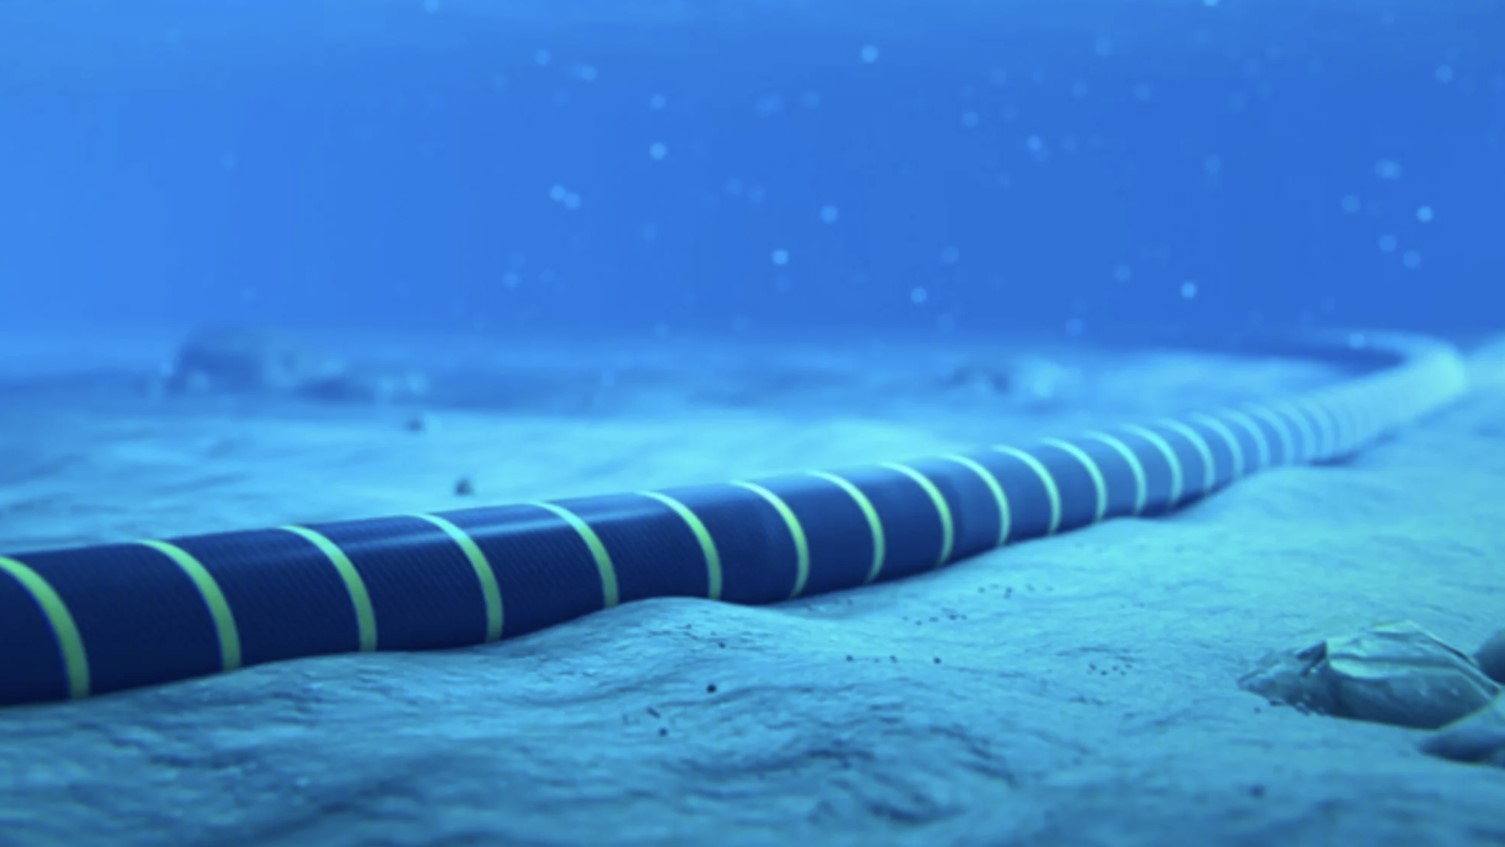 Technical due diligence wraps up for what will be world's longest HVDC subsea cable